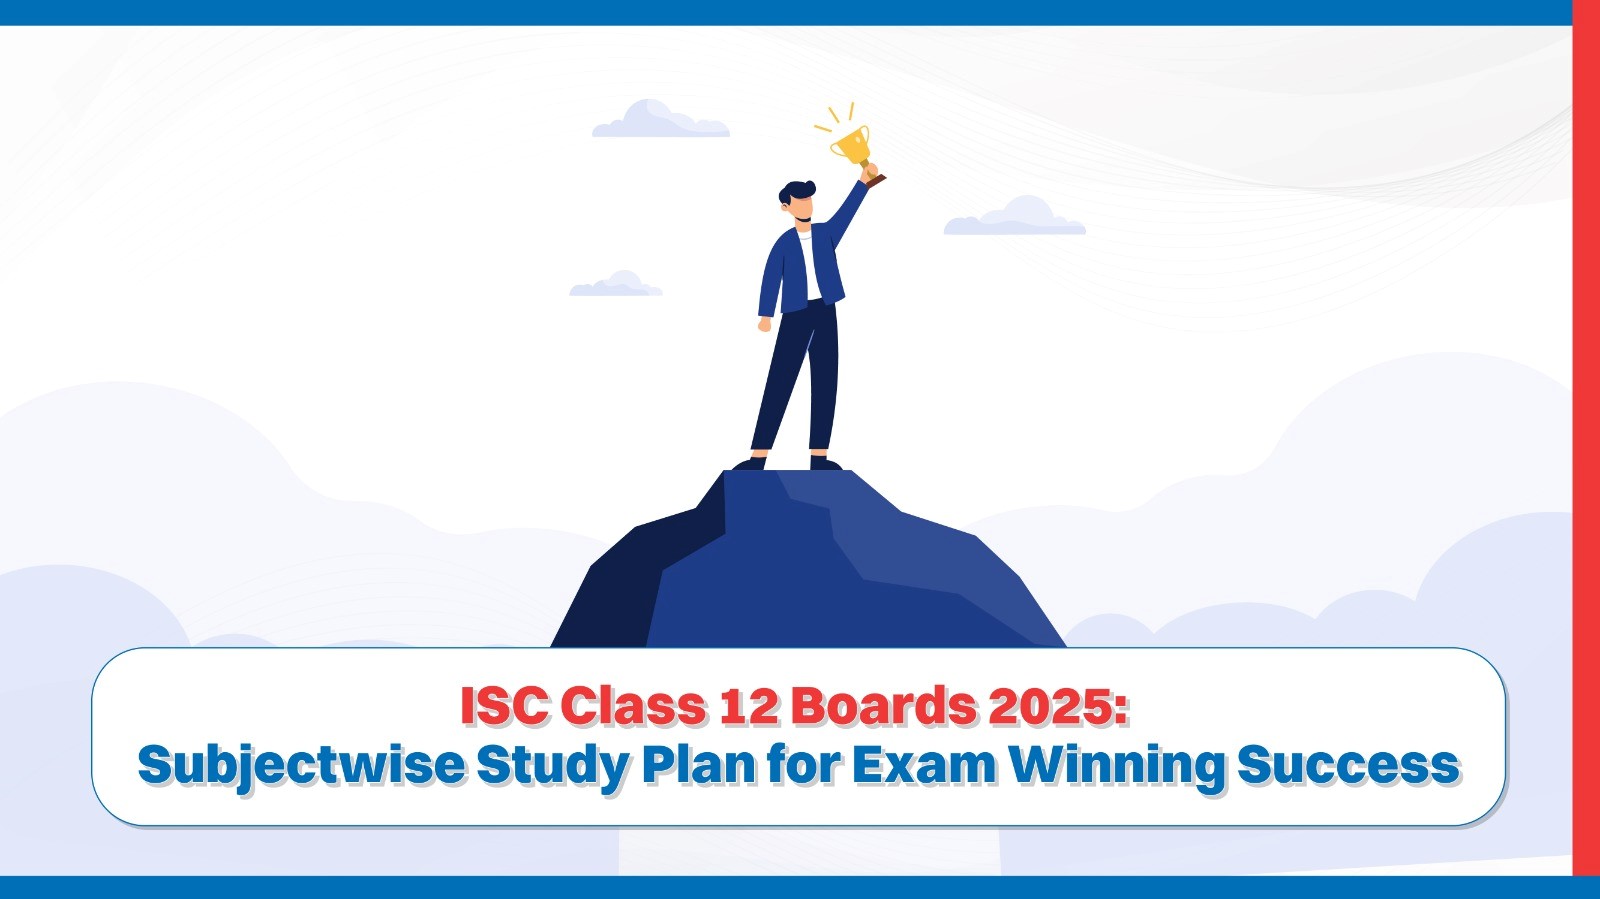 ISC Class 12 Boards 2025 Subject wise Study Plan for Exam Winning Success.jpg